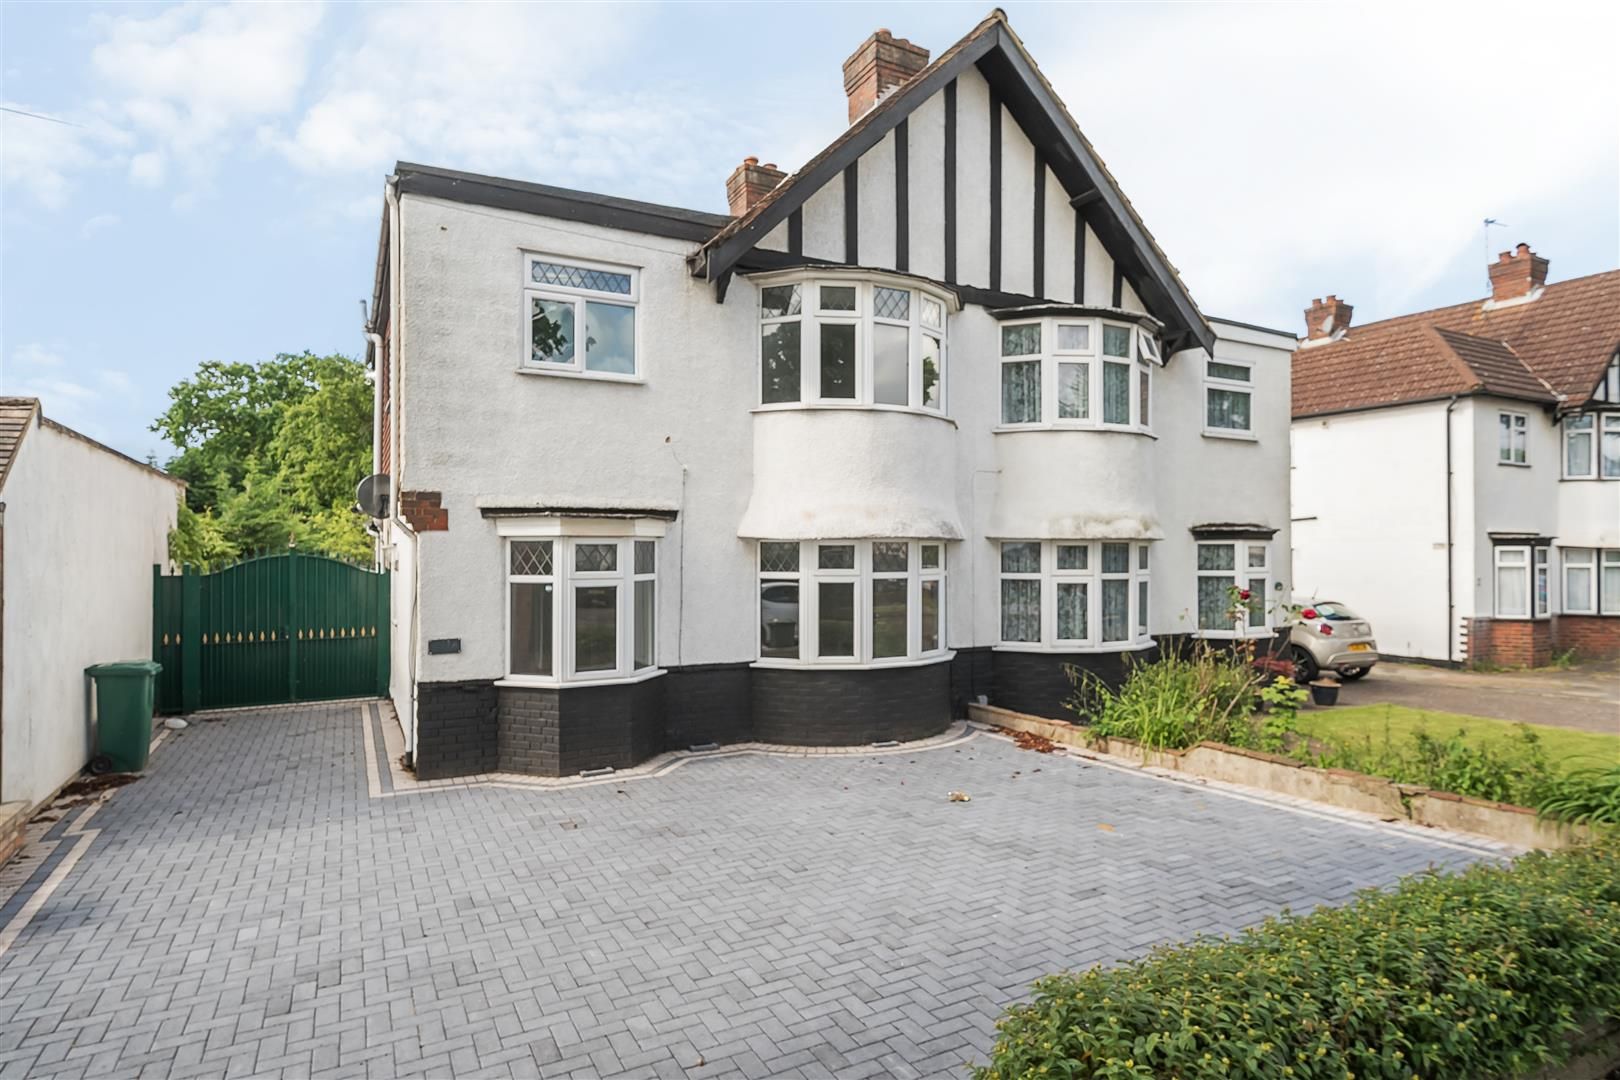 Lakeswood Road, Petts Wood, BR5 1BJ